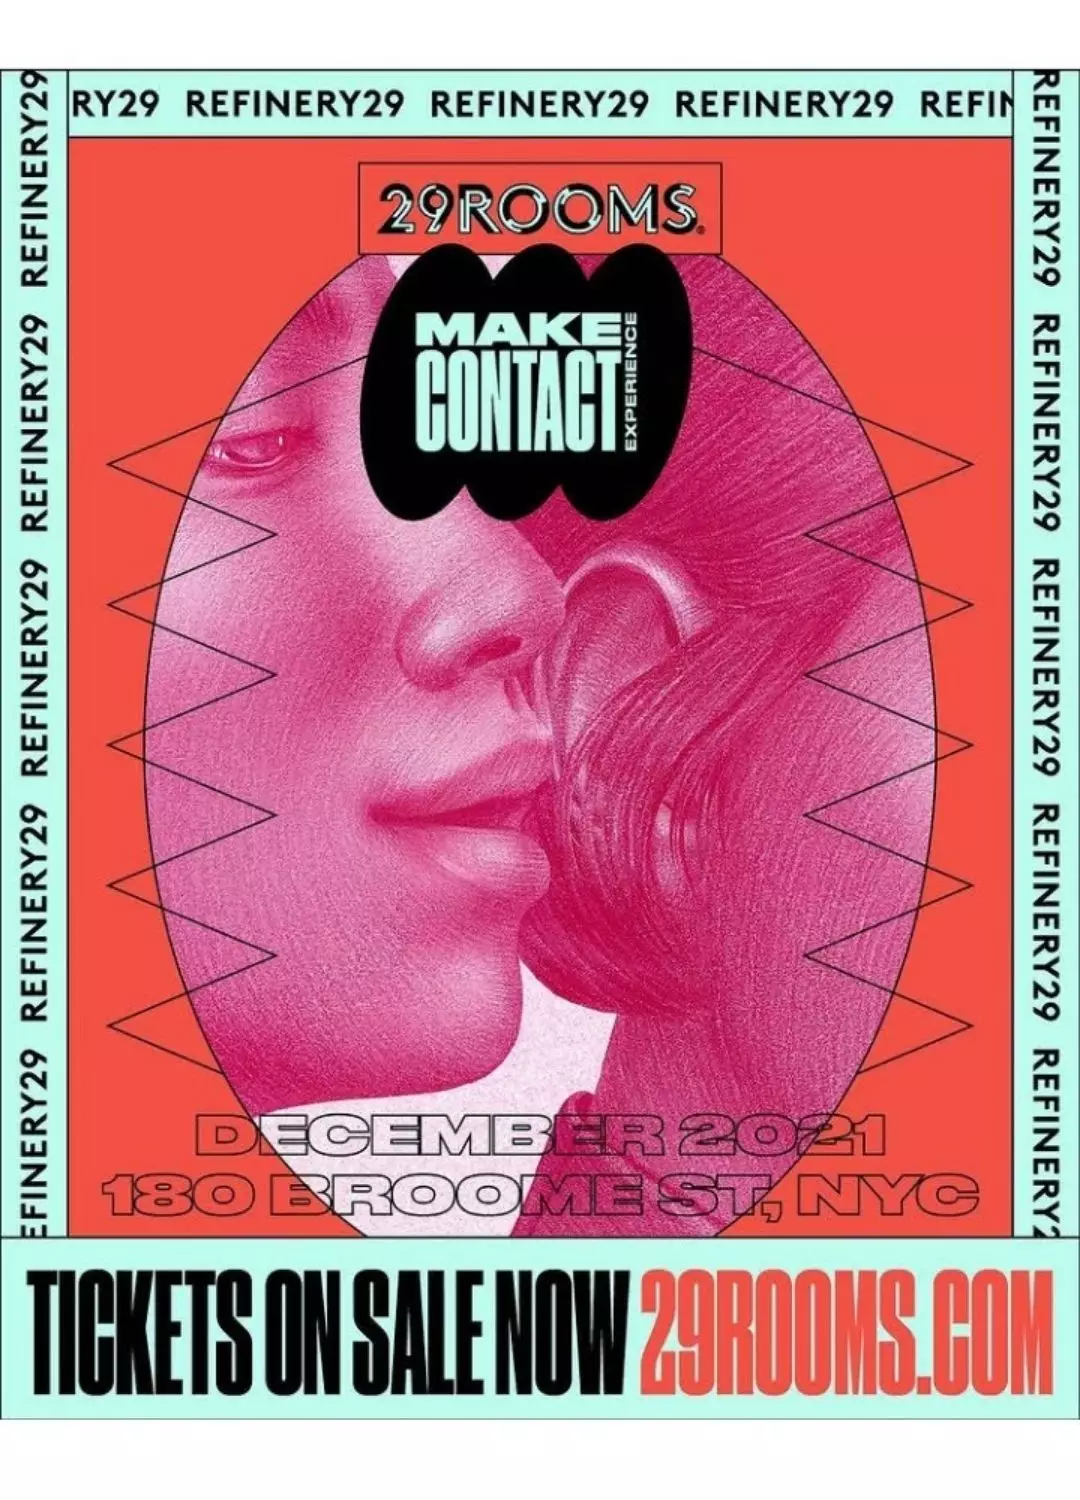 ‘Make Contact’ event